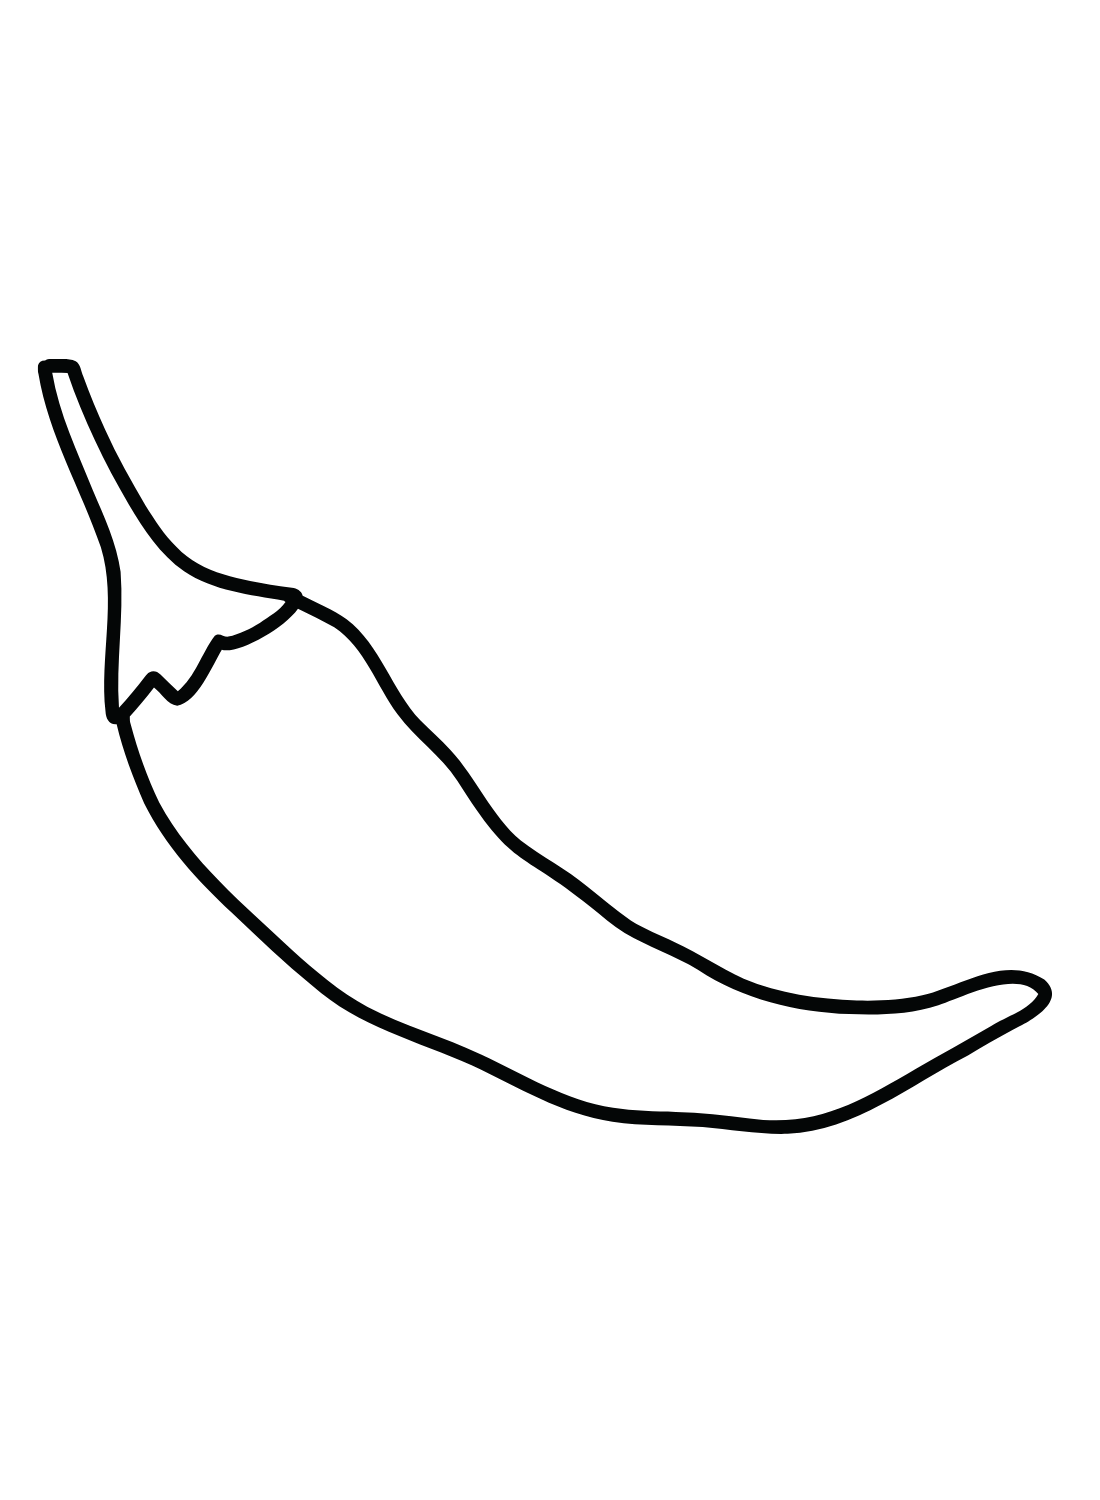 Chili Pepper Drawing from Chili Pepper